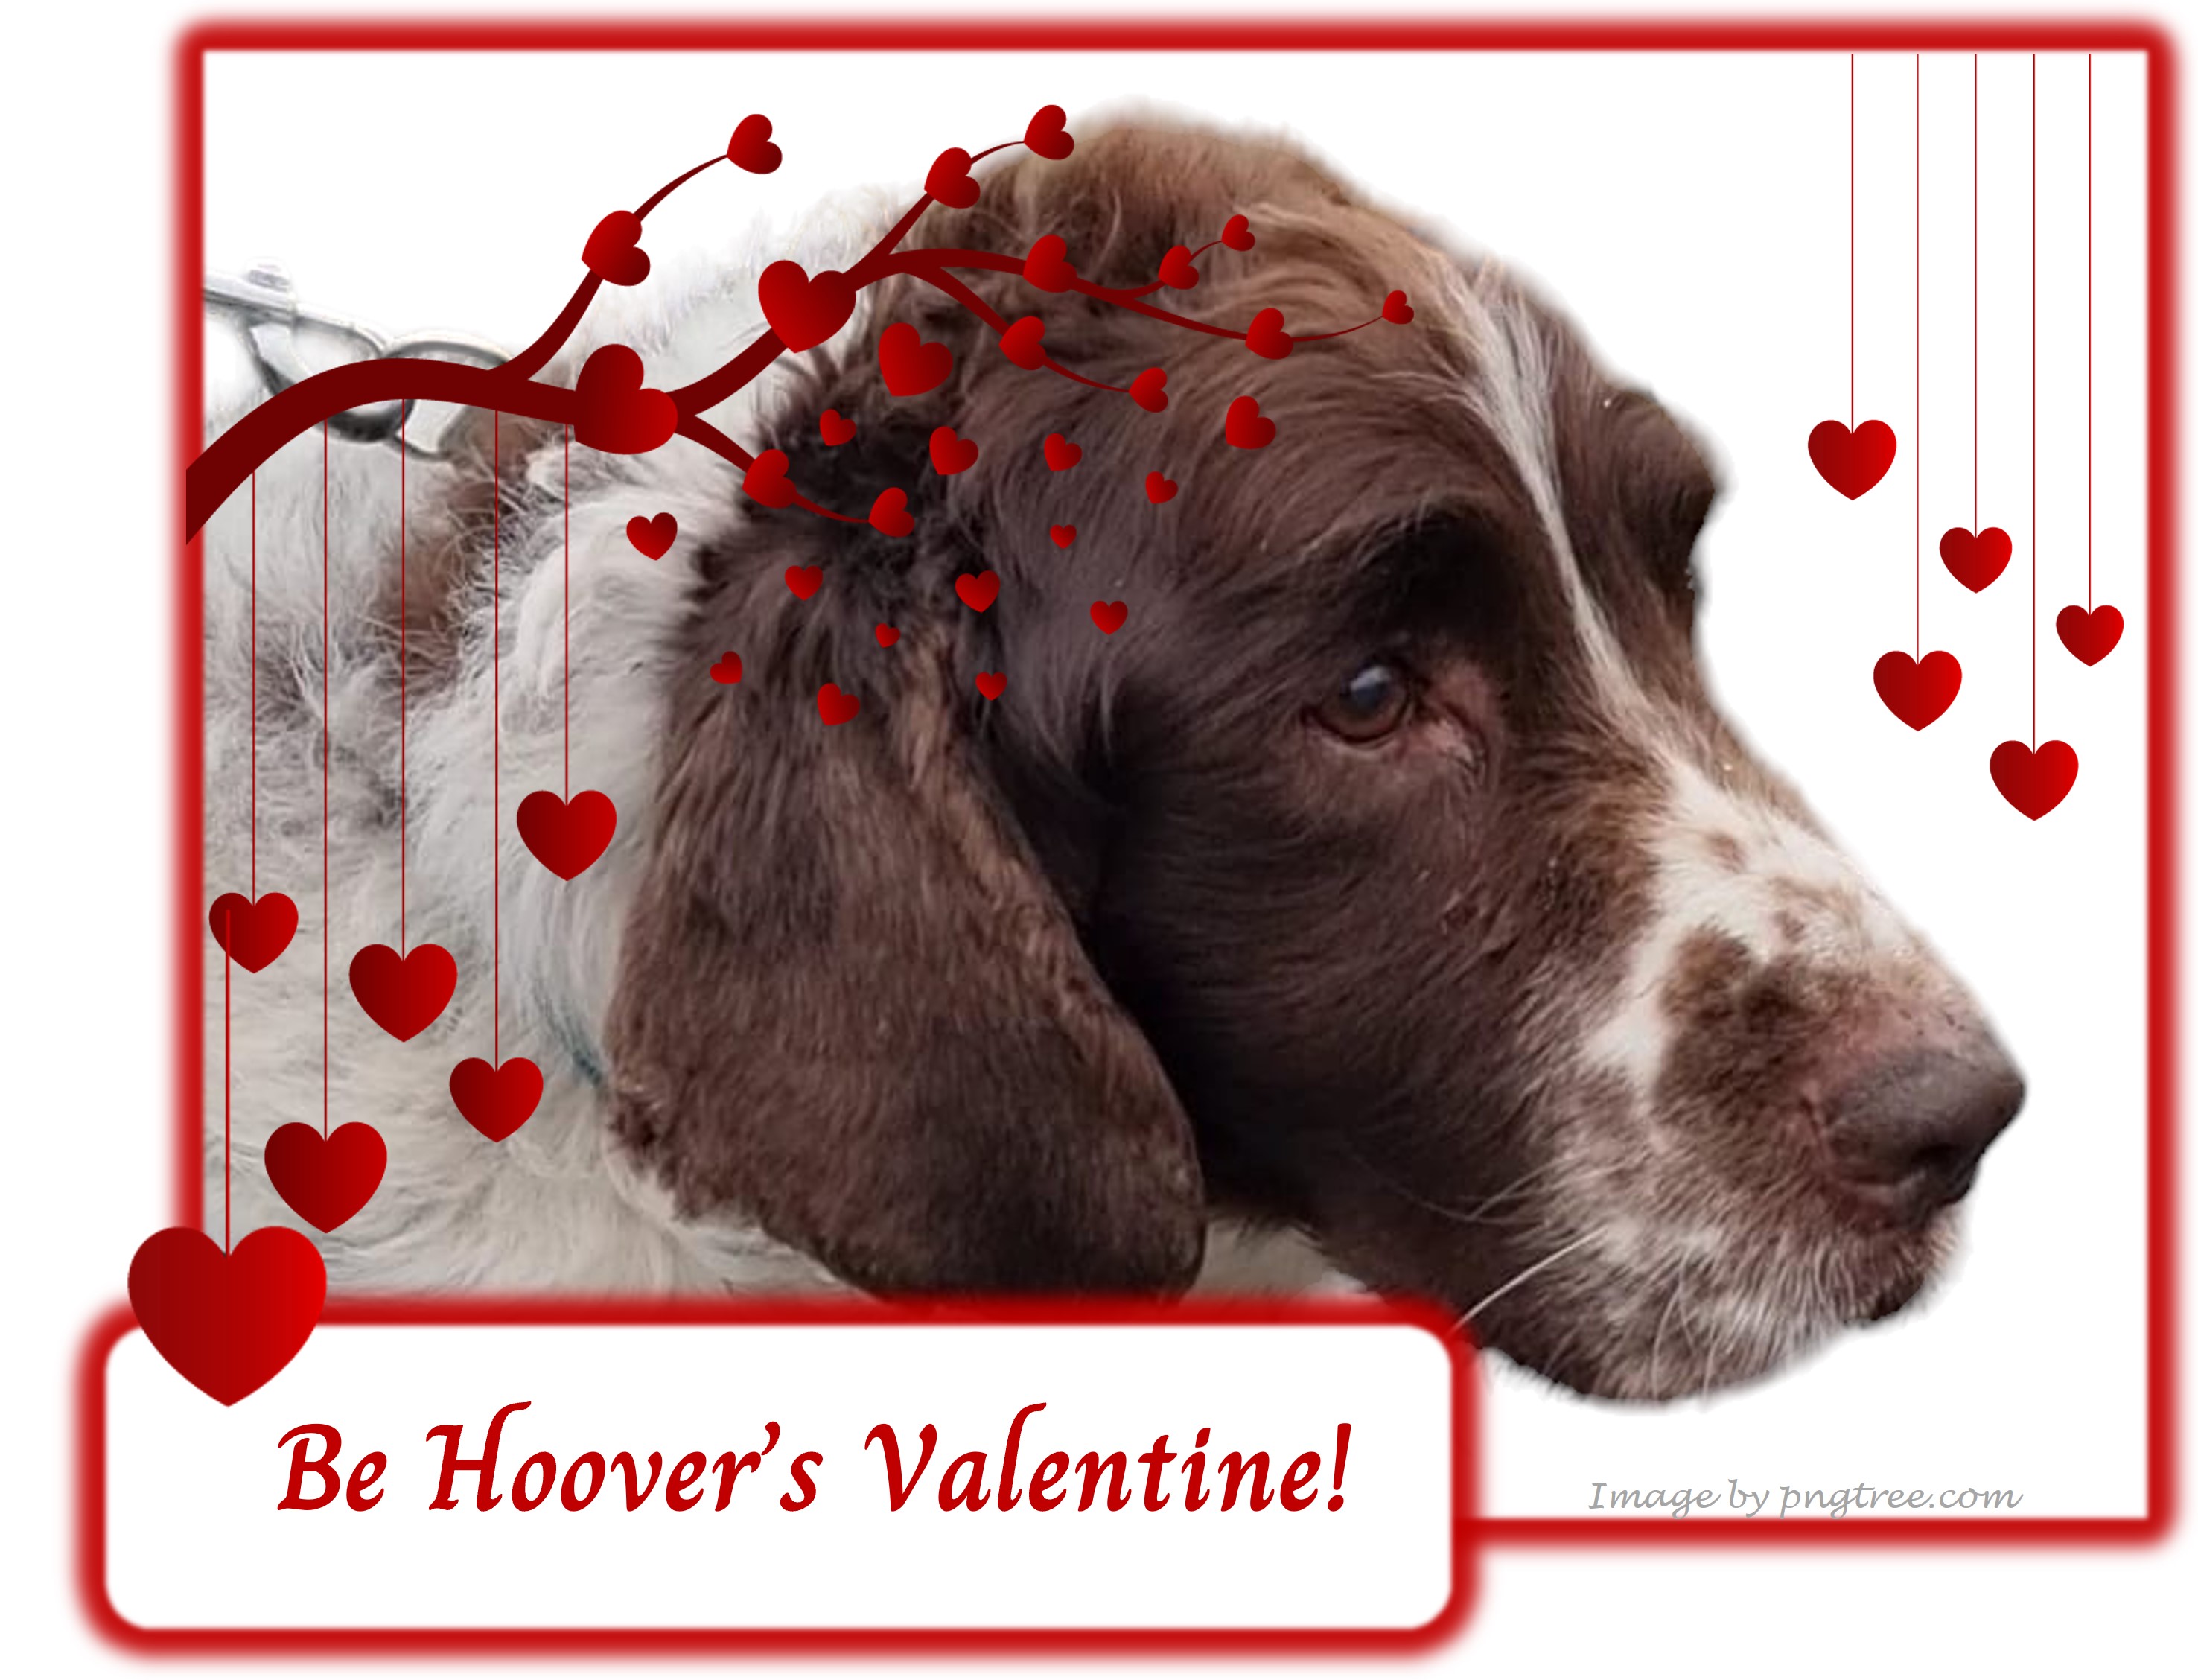 Be Hoover’s Valentine!